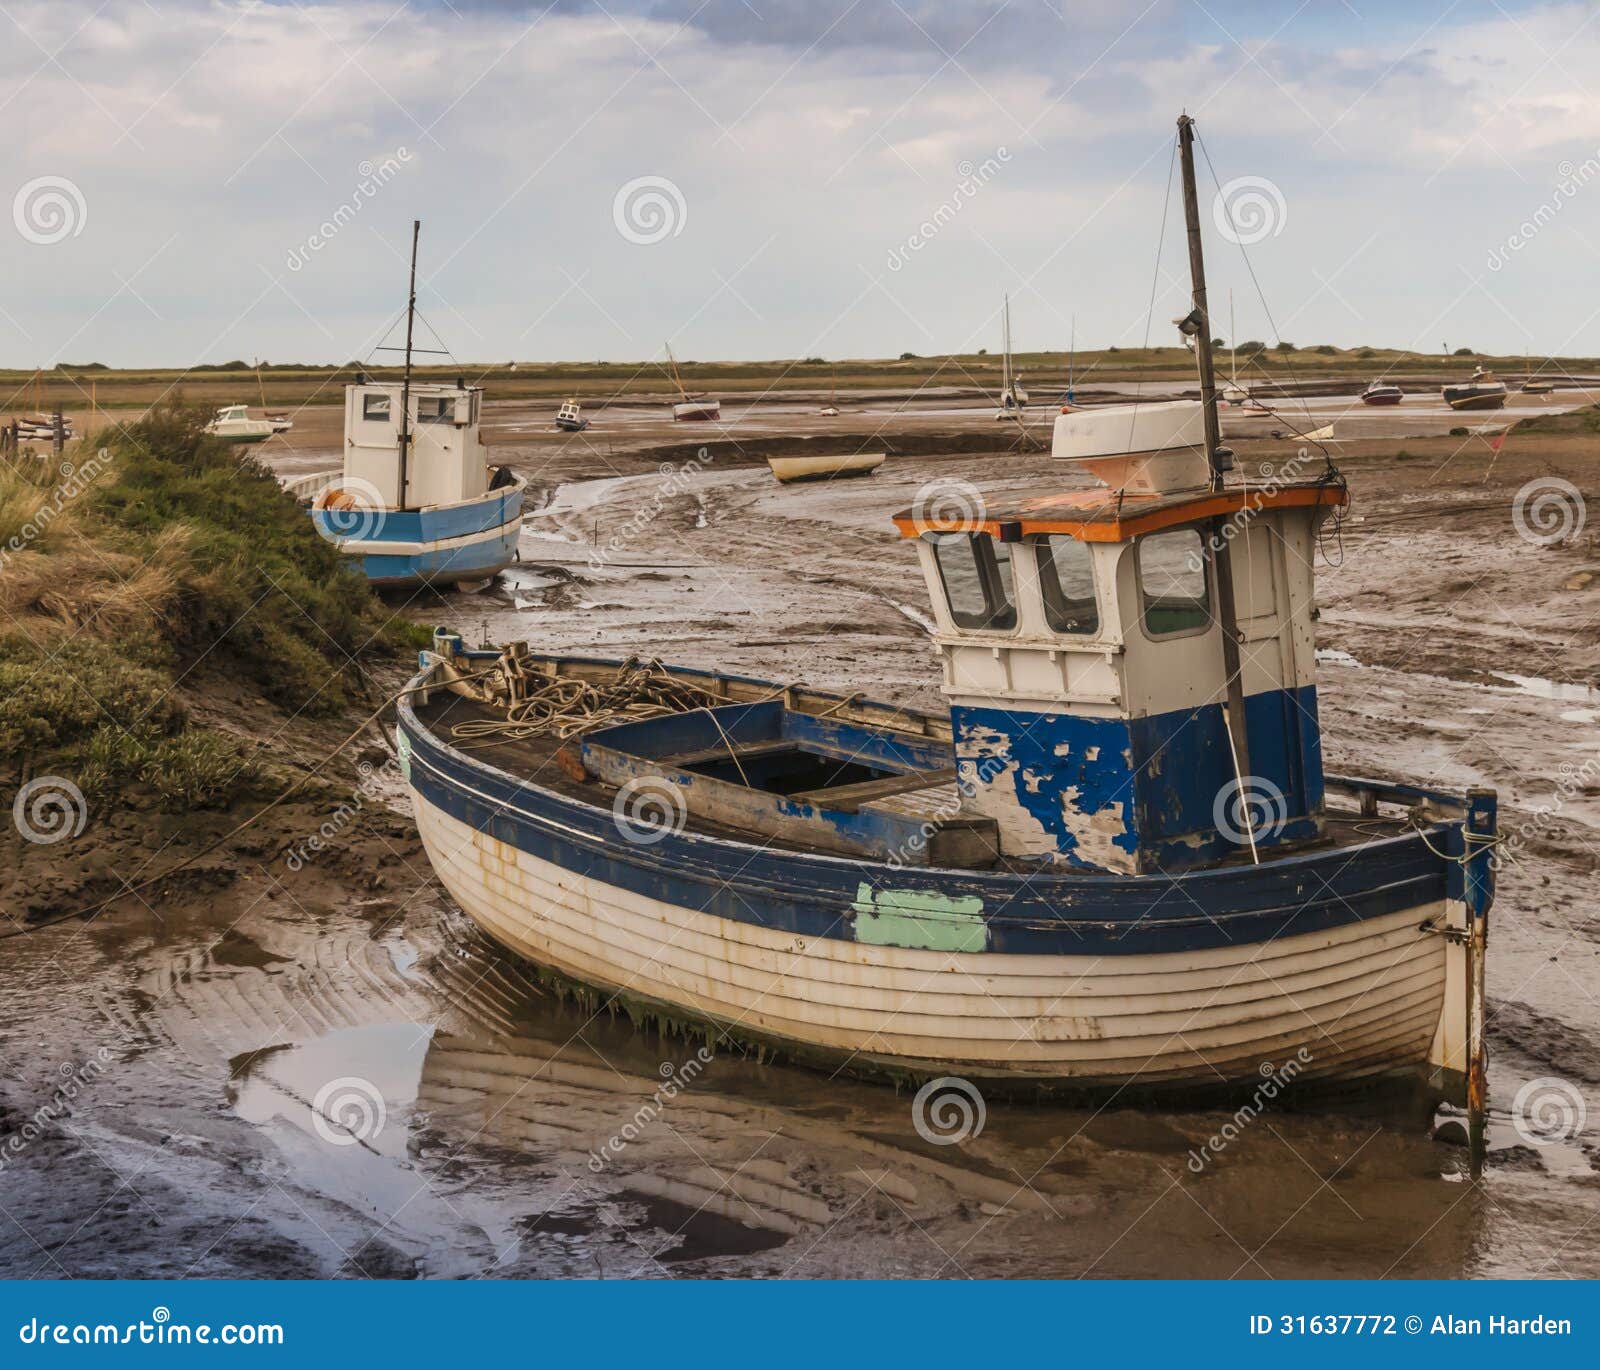 Old wooden fishing boat on mud flats at Brancaster Norfolk England.